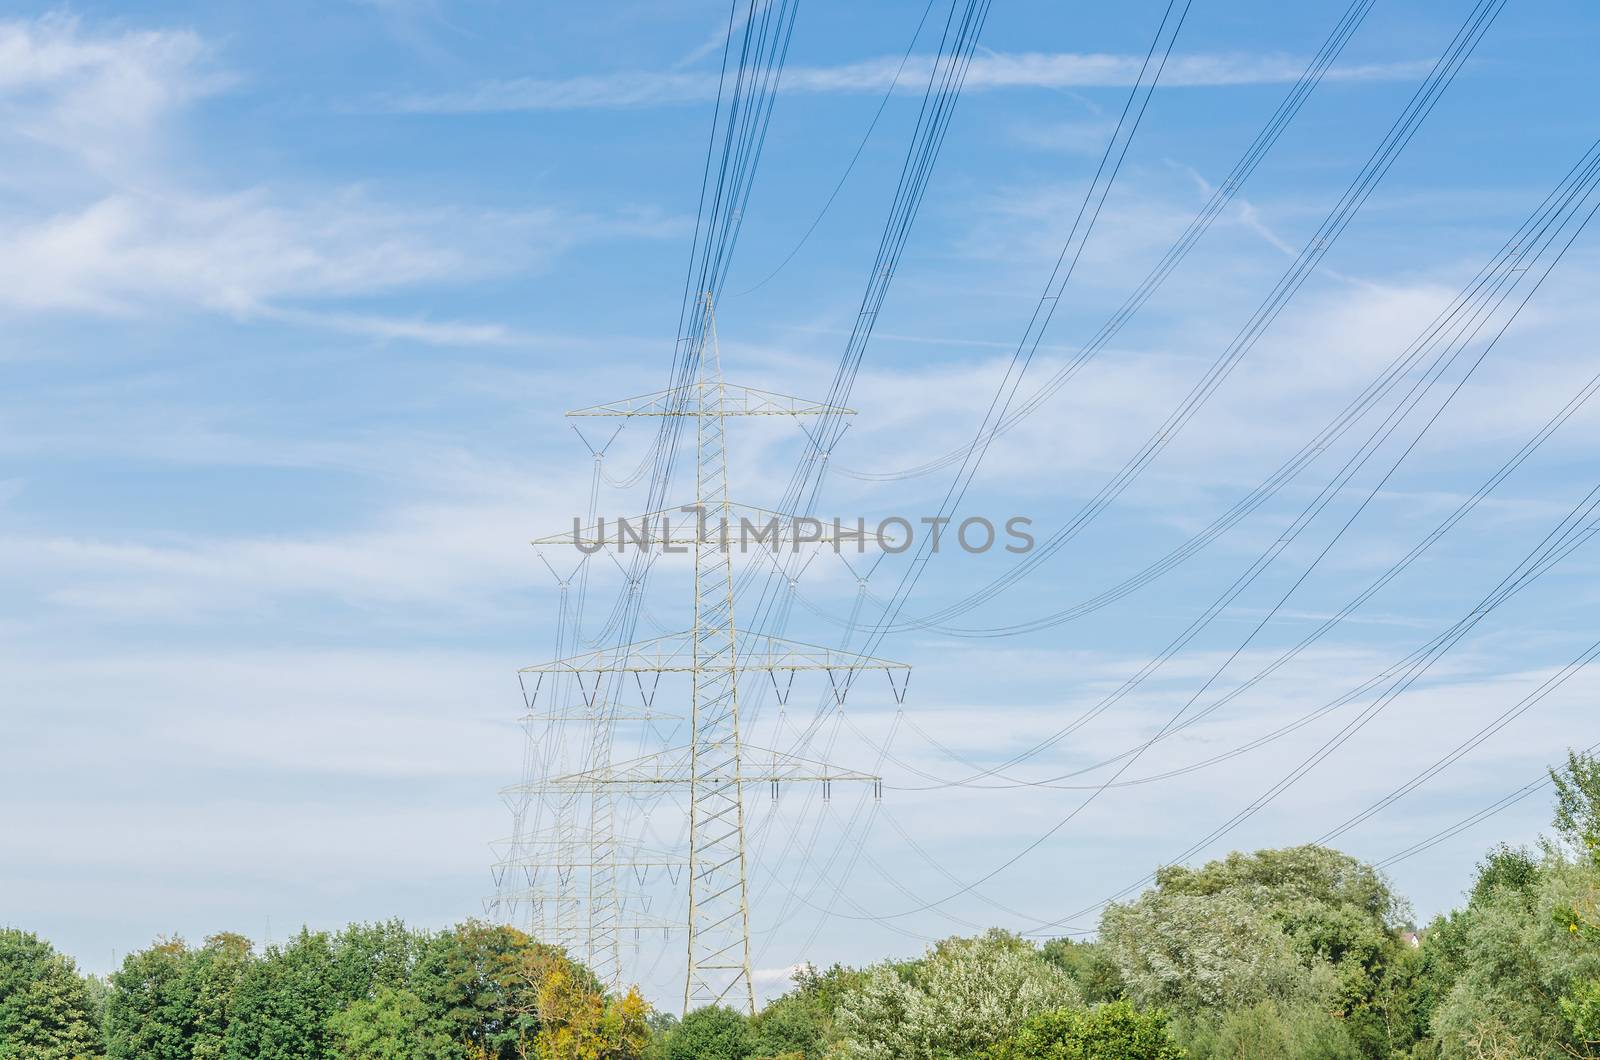 High voltage towers with blue sky in the background.